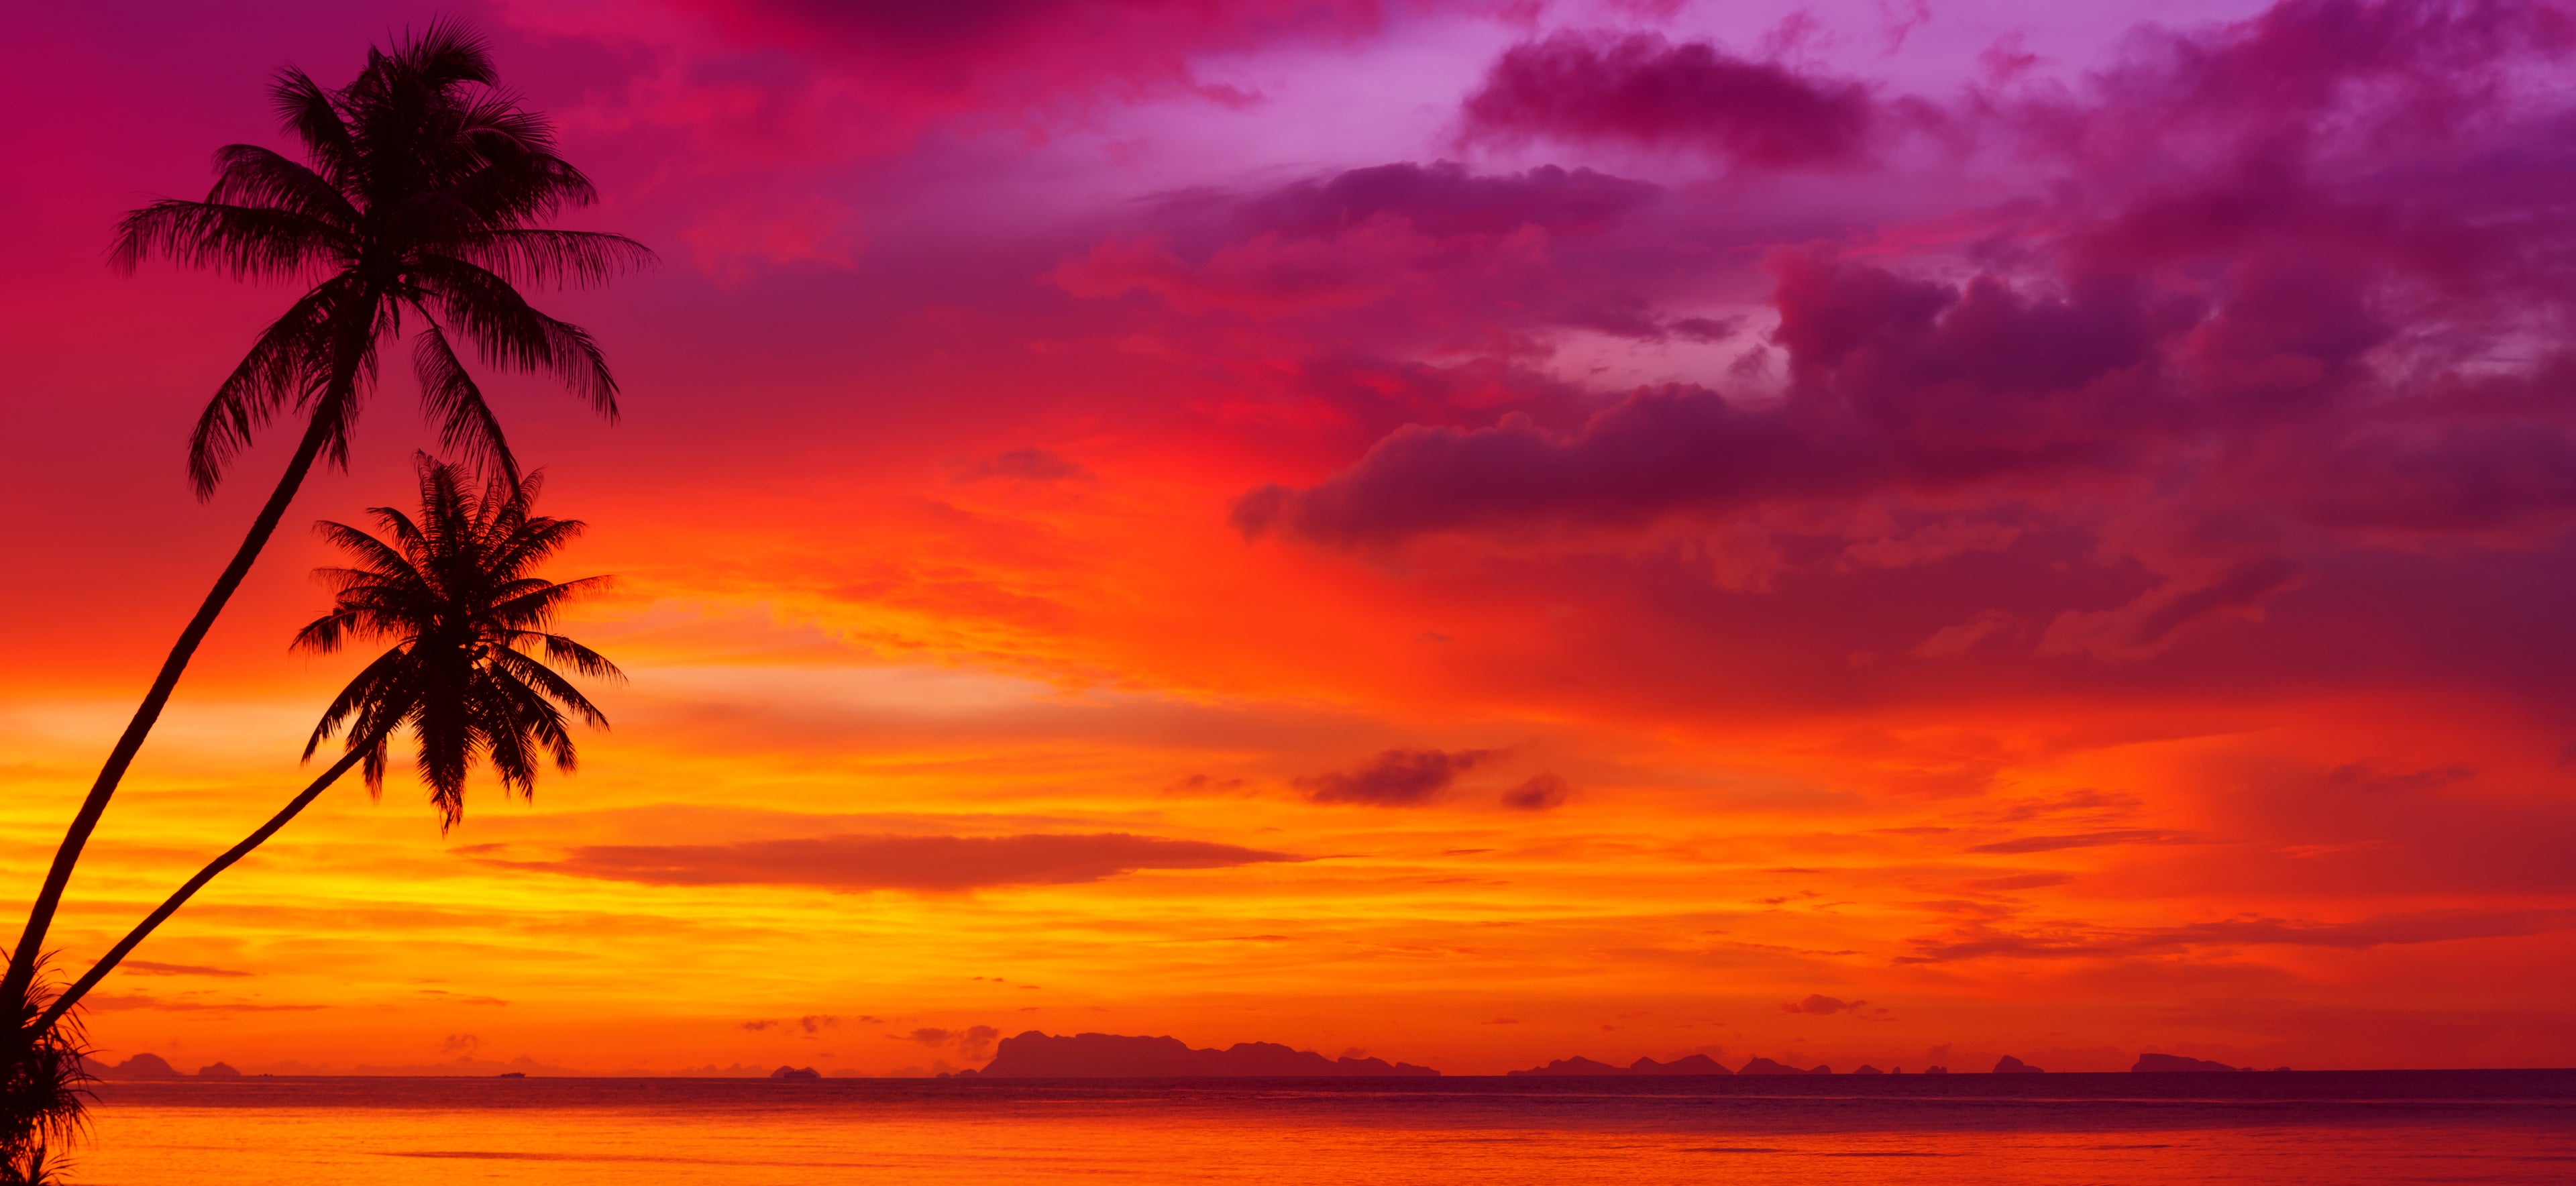 A vibrant orange, red and purple sunset above a tropical beach with two palm trees on the left.